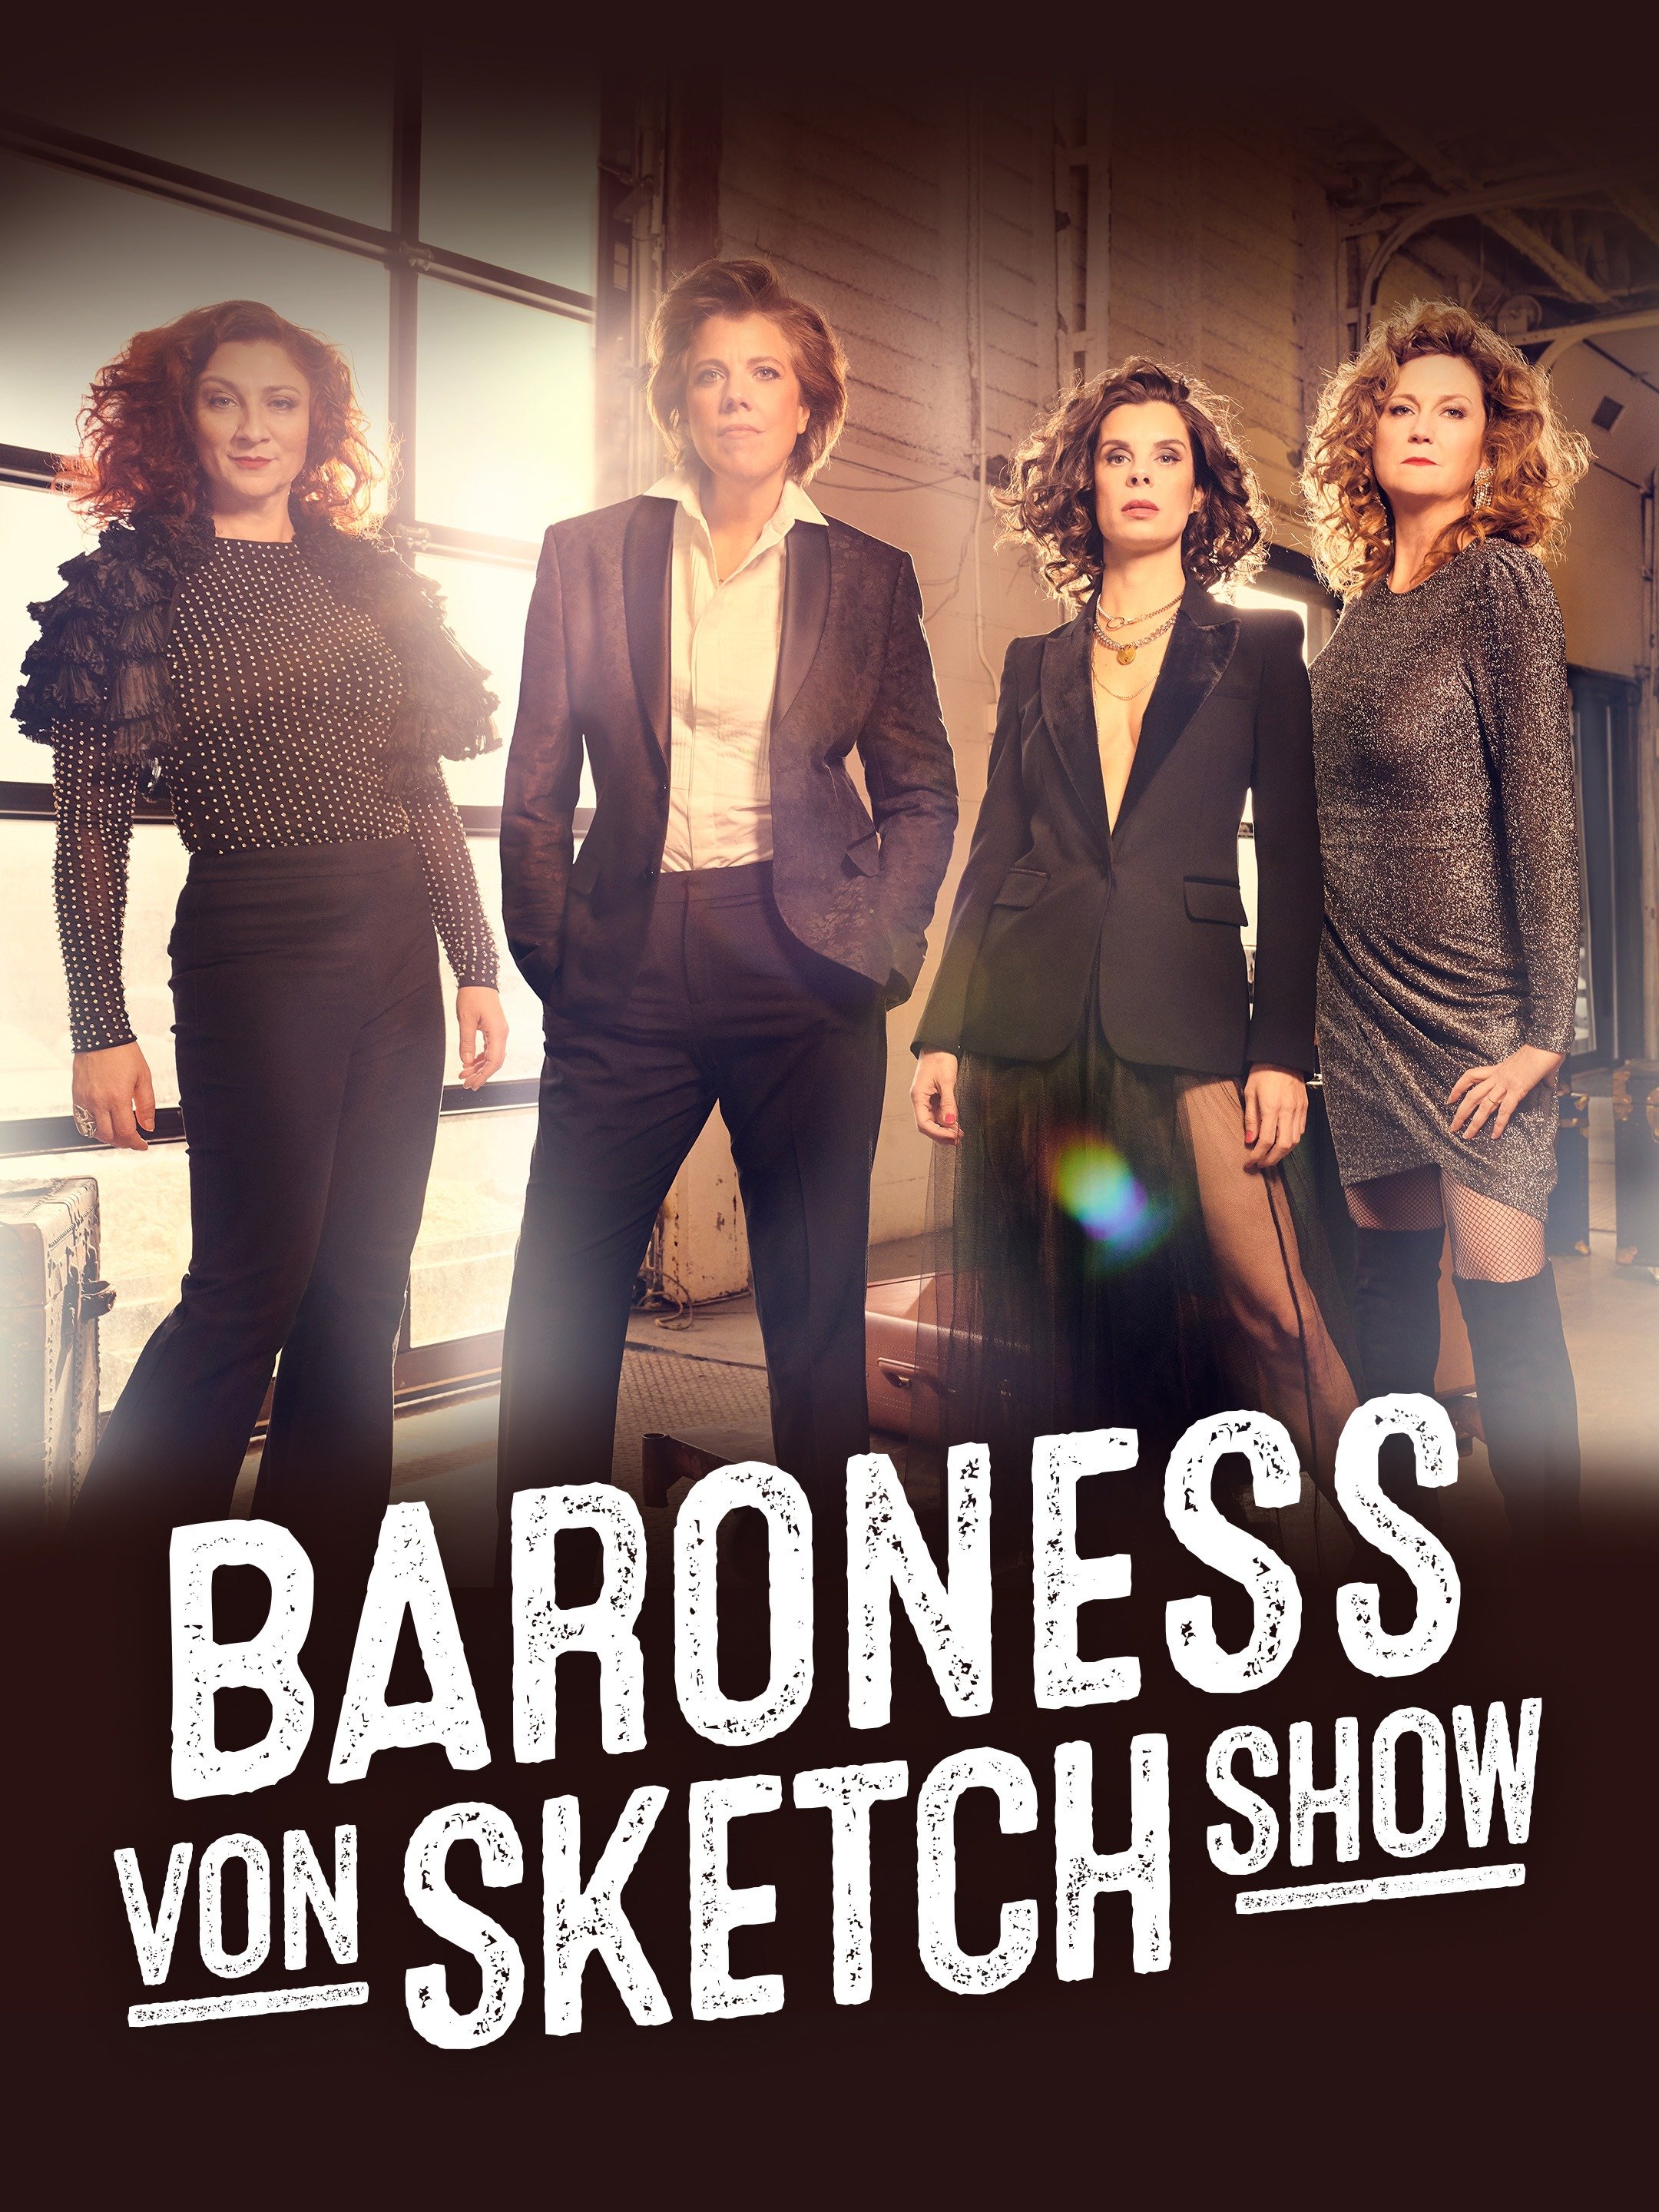 Baroness Von Sketch Show Trailers And Videos Rotten Tomatoes 